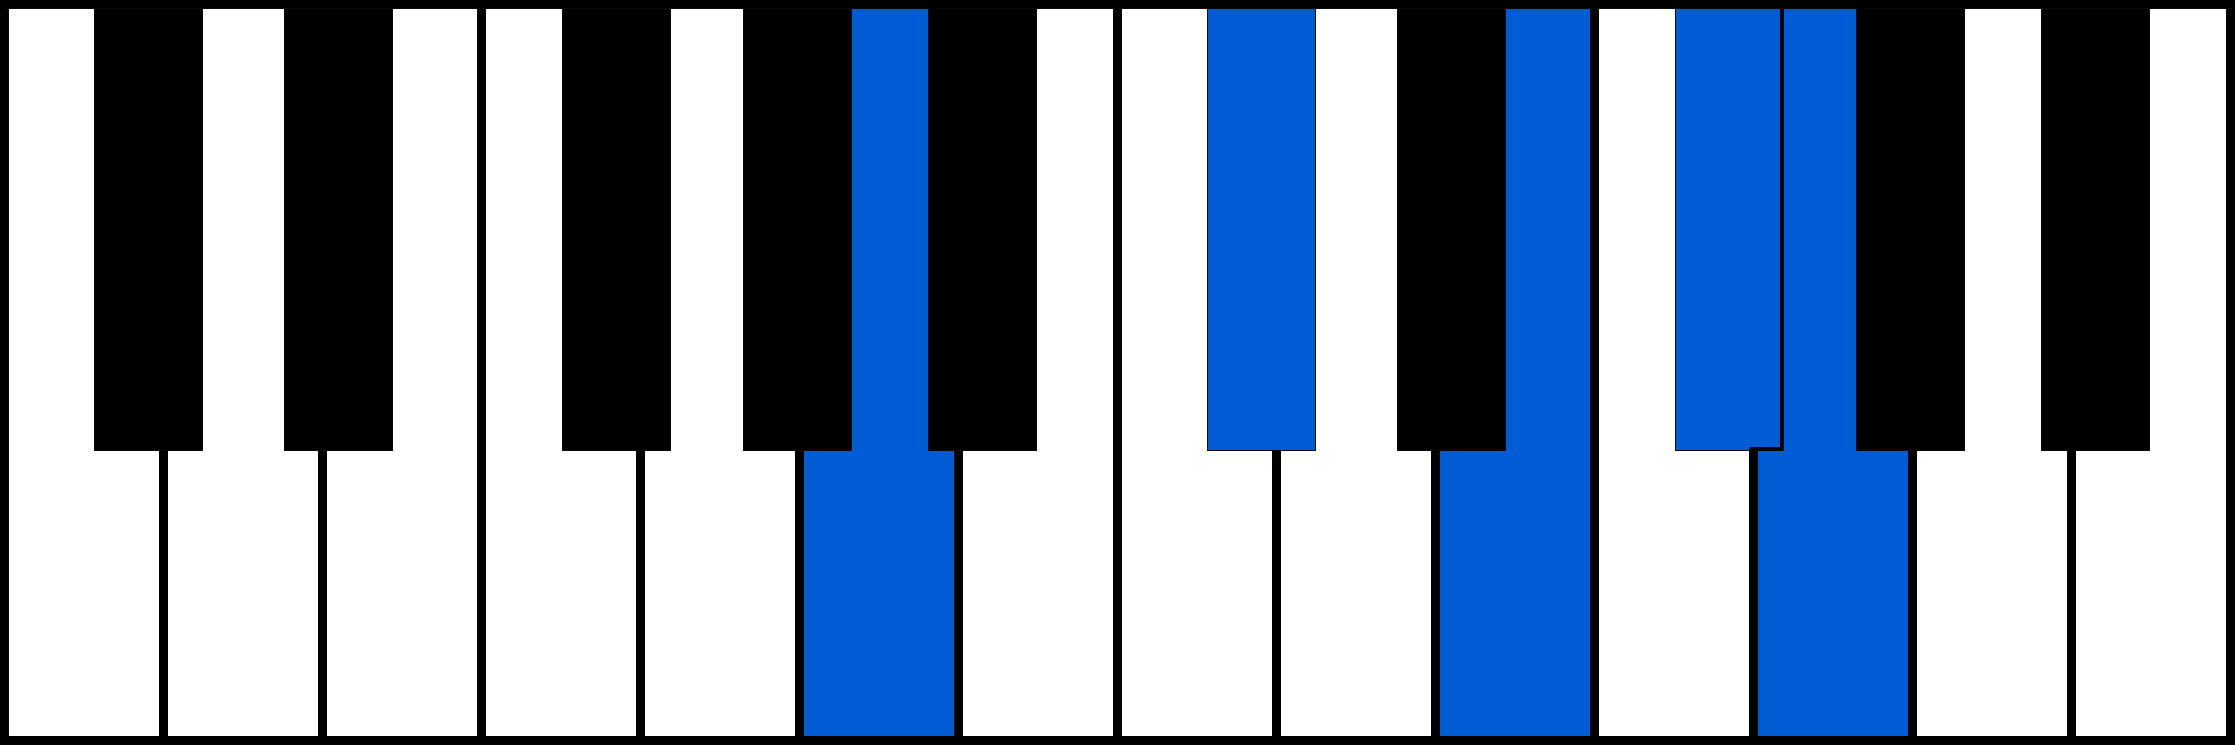 A7/6 piano chord fingering